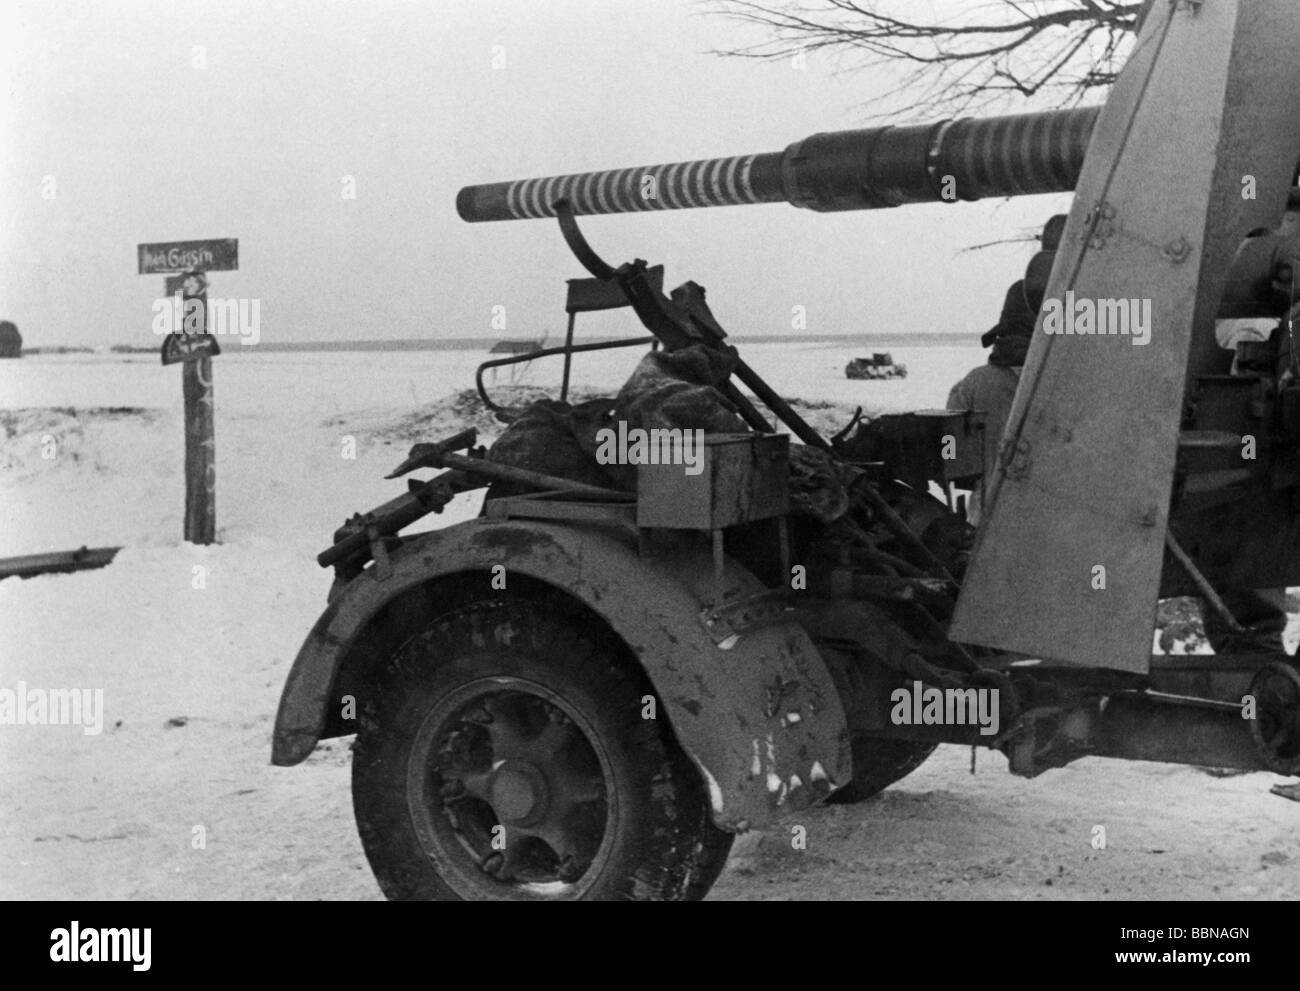 events, Second World War / WWII, Russia 1944 / 1945, German 88 mm anti-aircraft gun Flak 36/37, southern sector of the Eastern Front, early 1944, Stock Photo